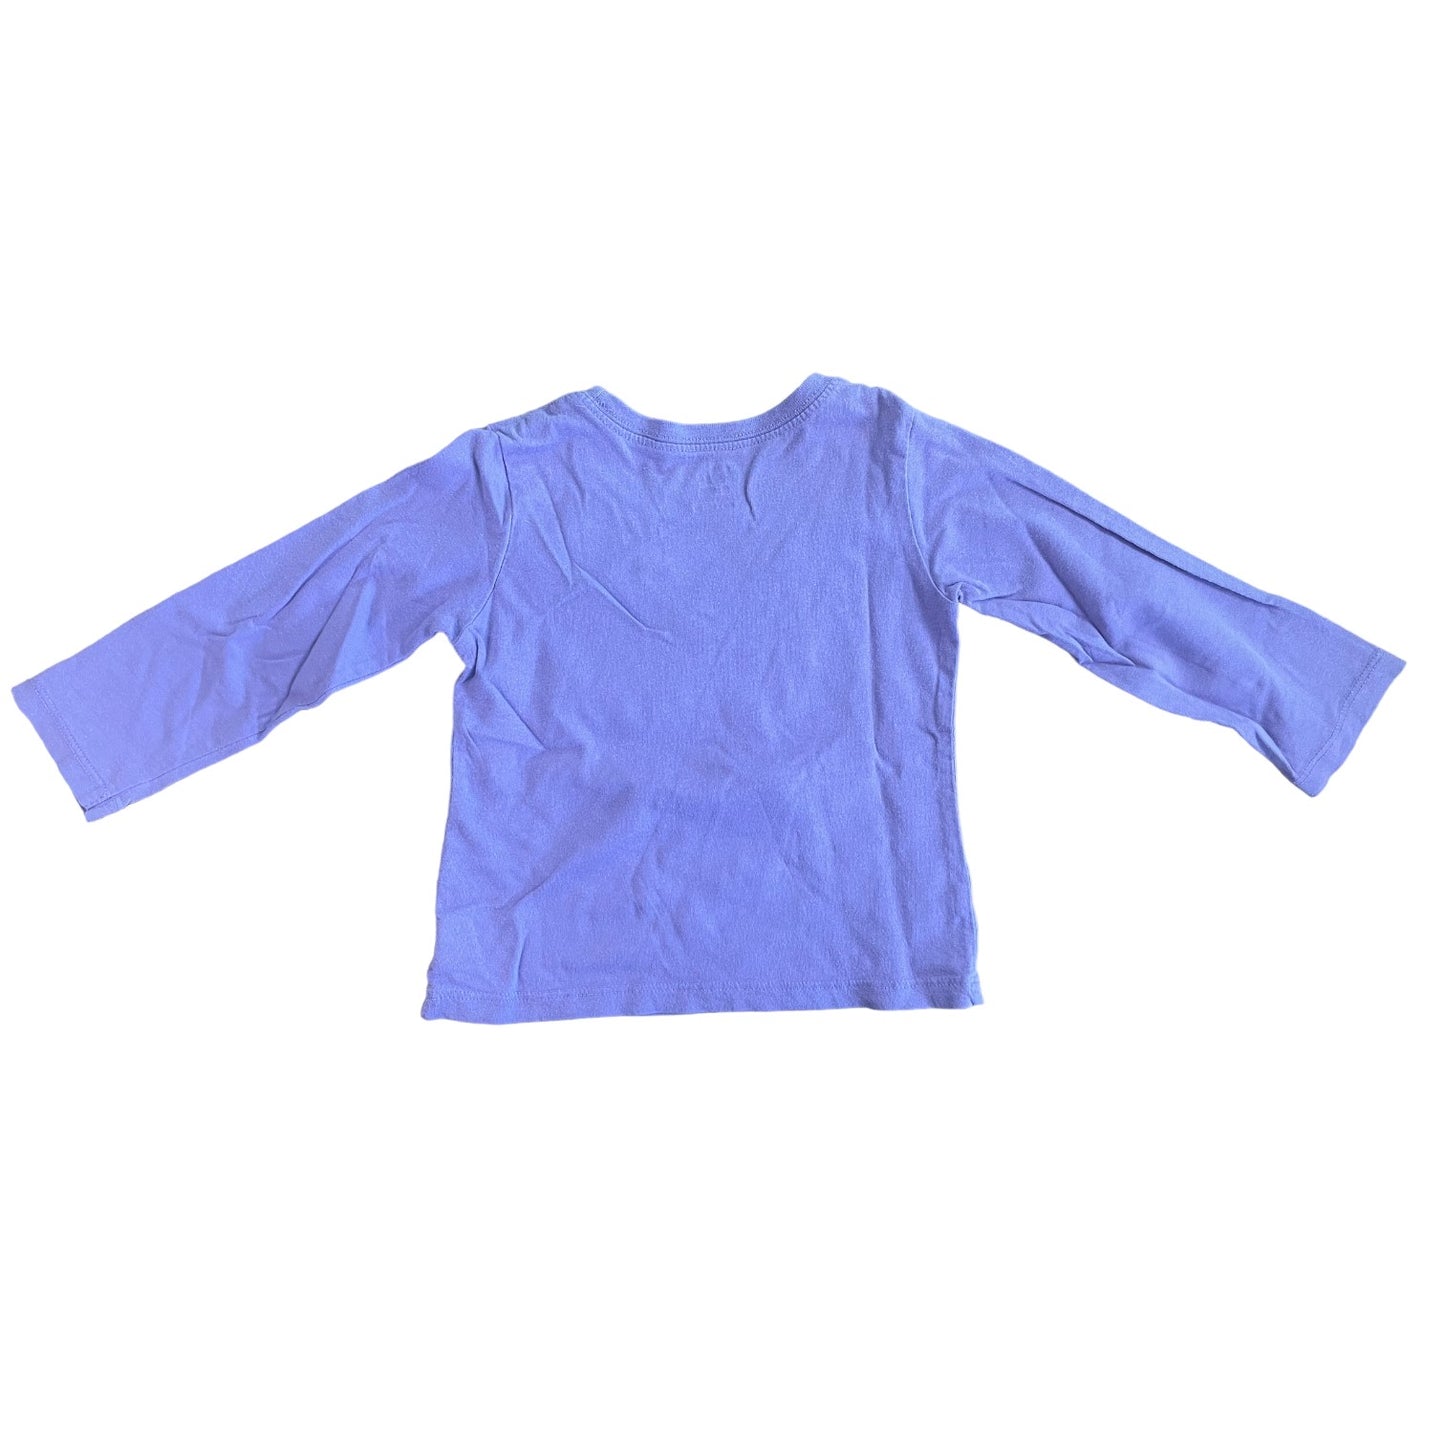 Children's Place Long Sleeve Tee Size 3T